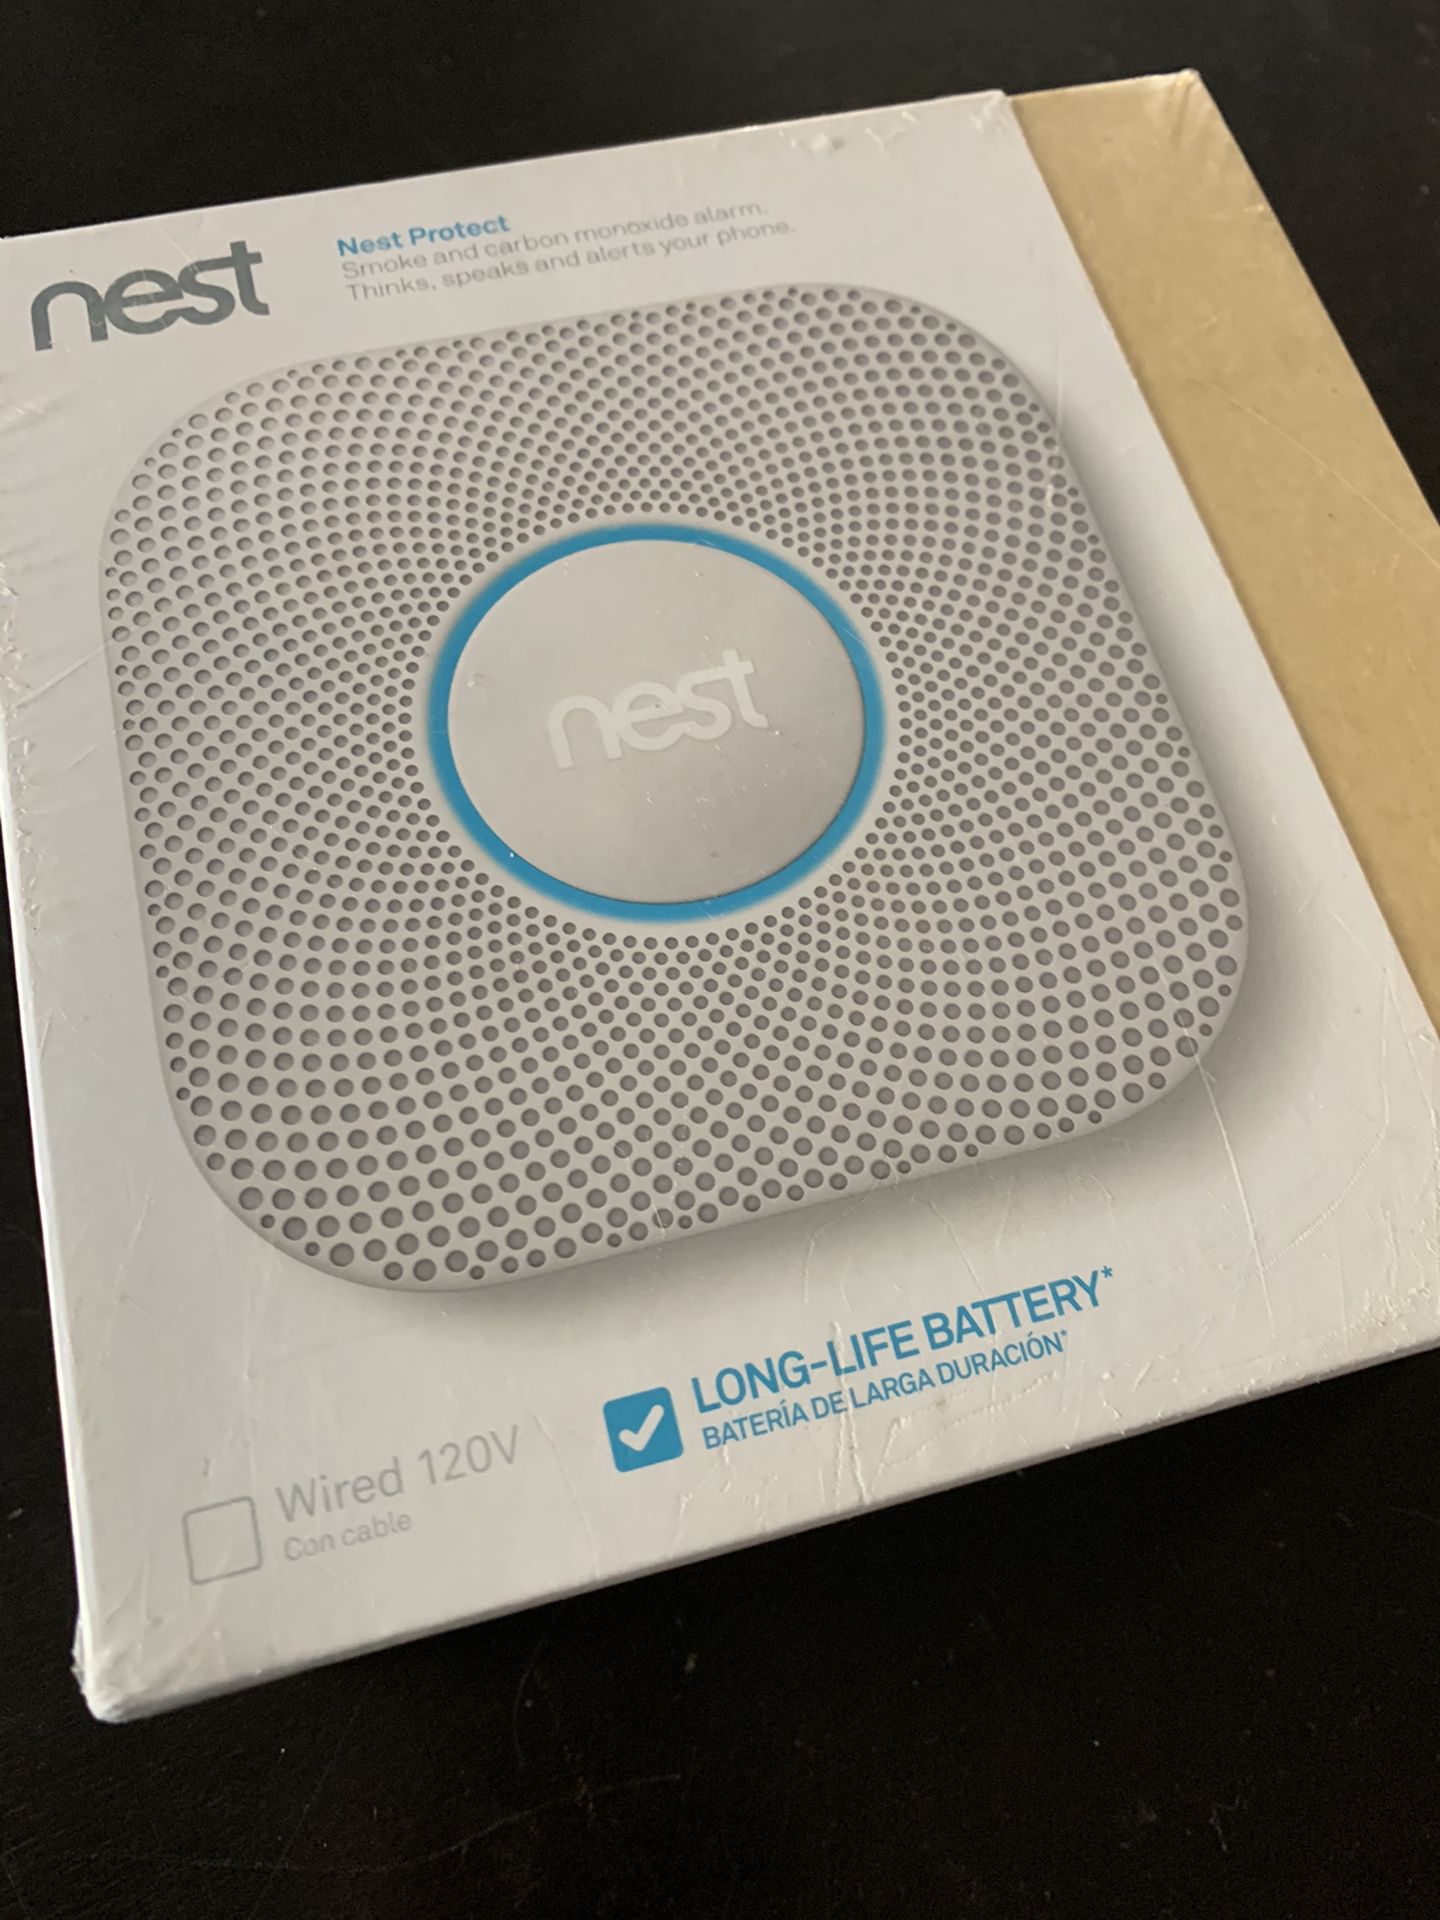 Nest Protect Battery Brand New In Box Unopened